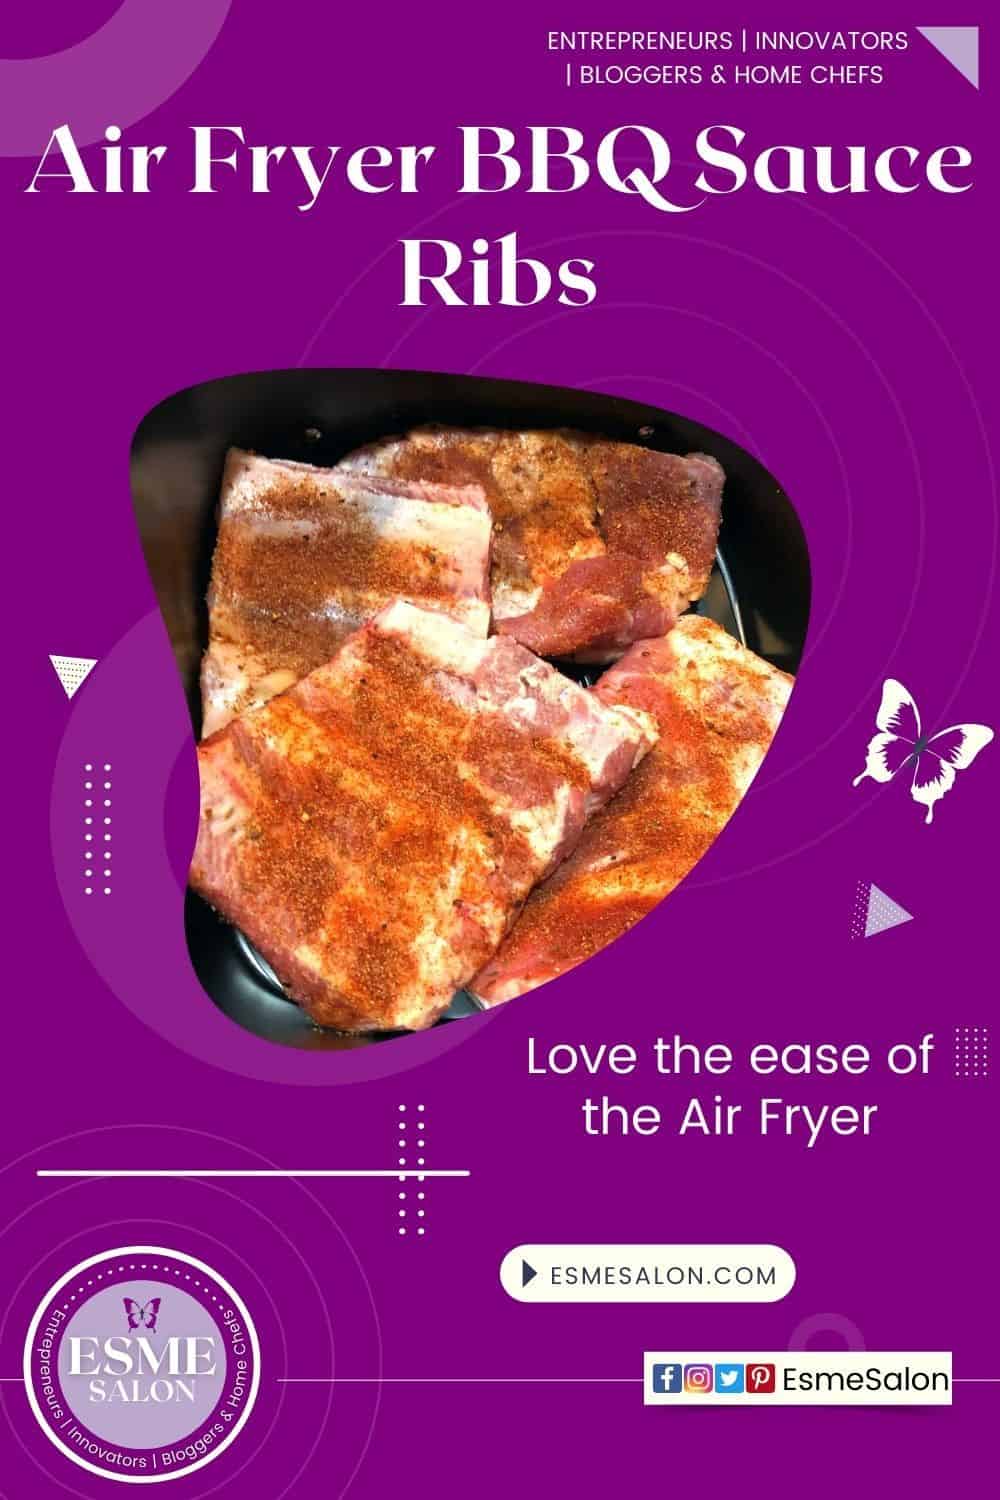 4 pieces of Ribs with dry rub and homemade BBQ sauce prepared in the Air Fryer